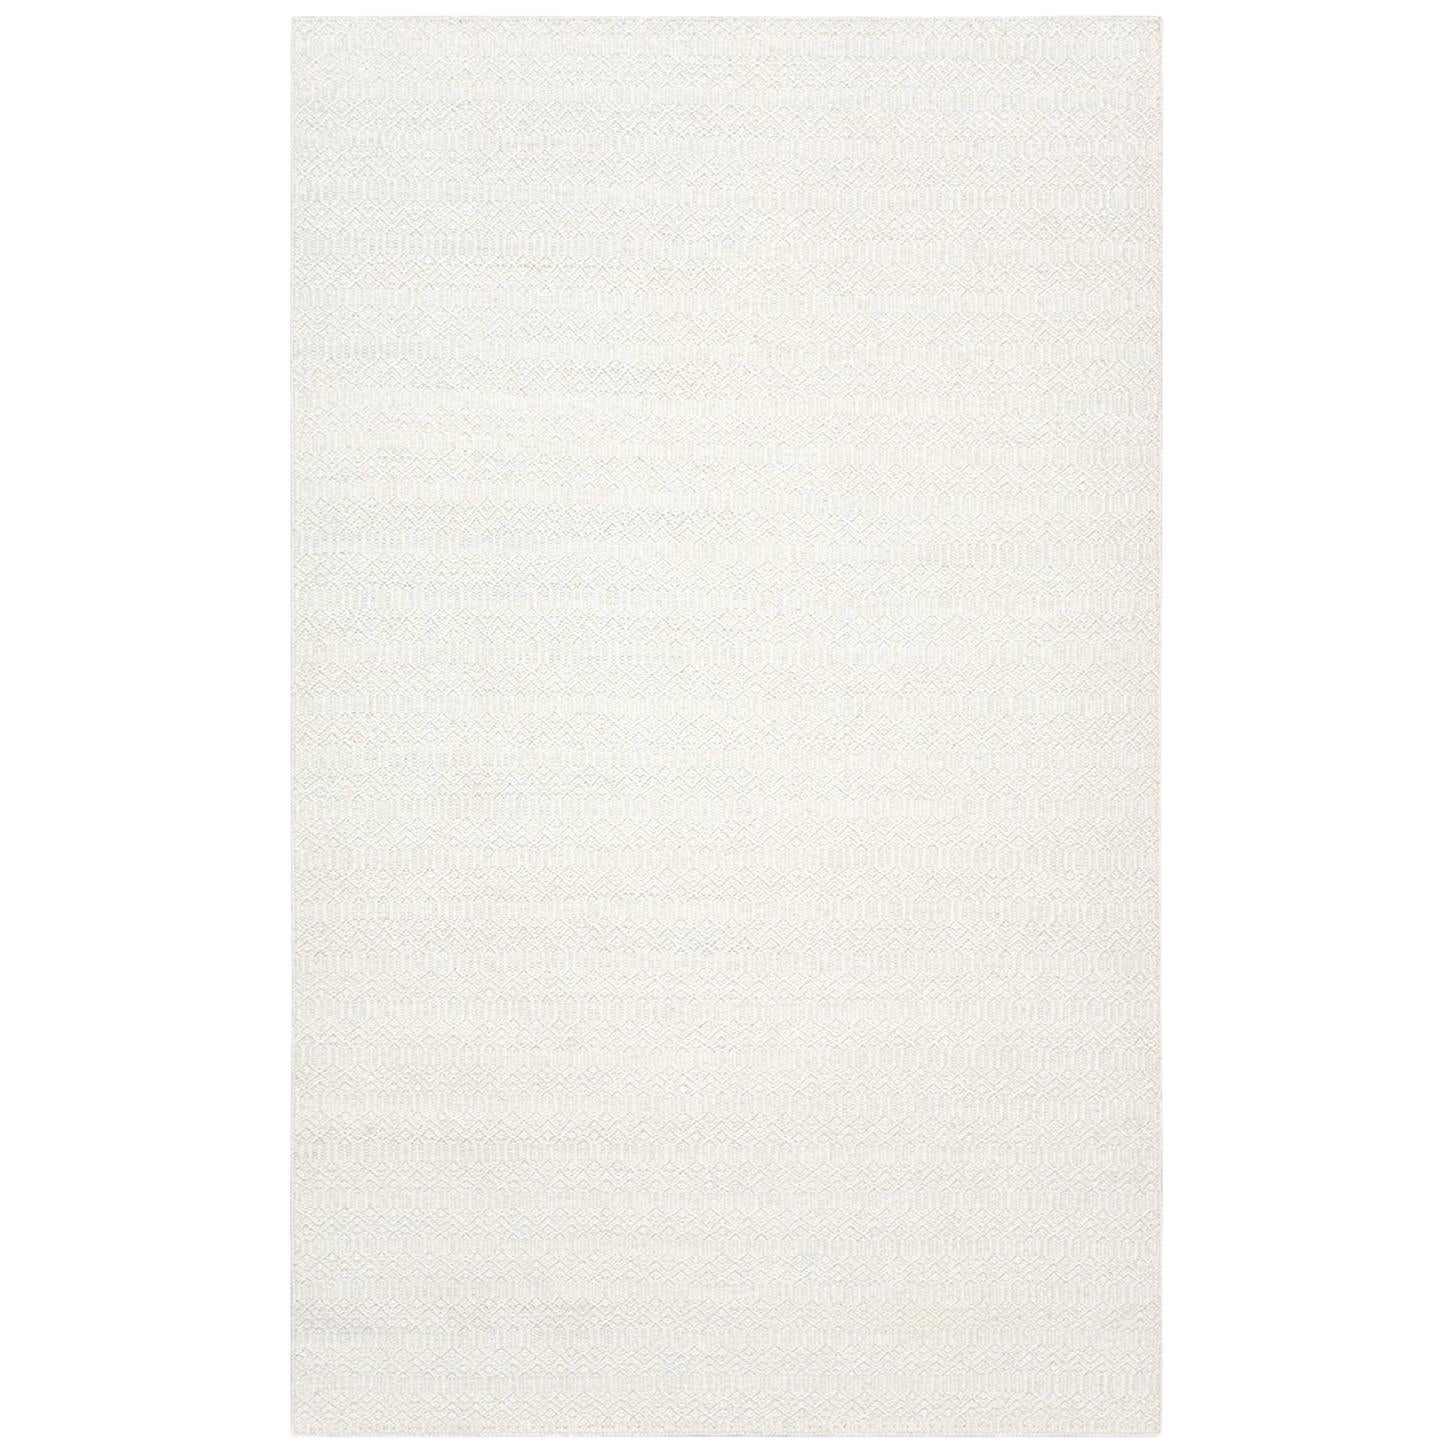 Chatham, Transitional Flat-Weave Handwoven Area Rug, Ivory